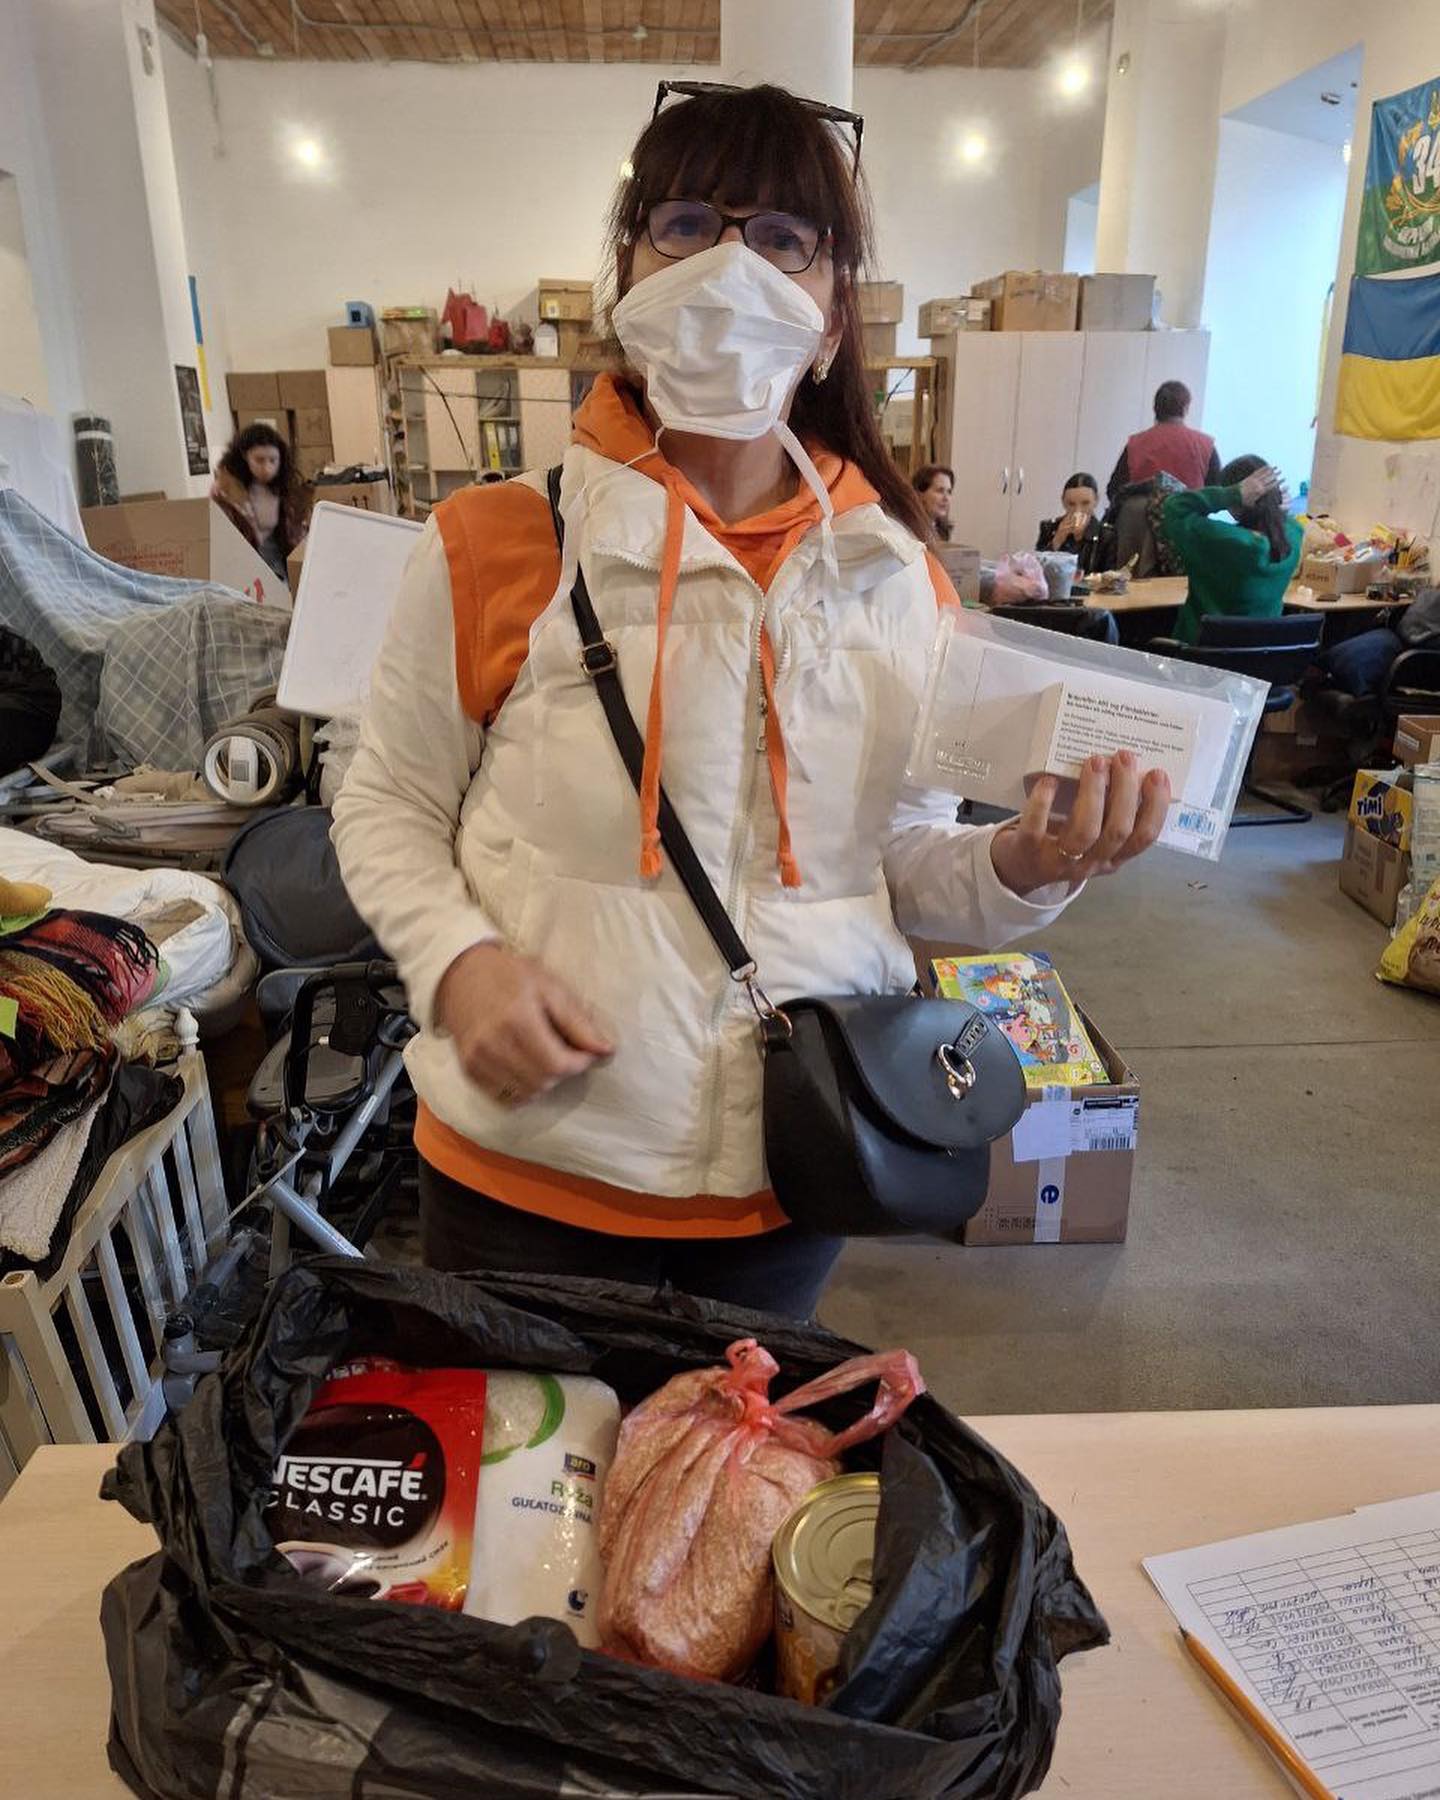 A woman in a mask stands next to a bag of food.